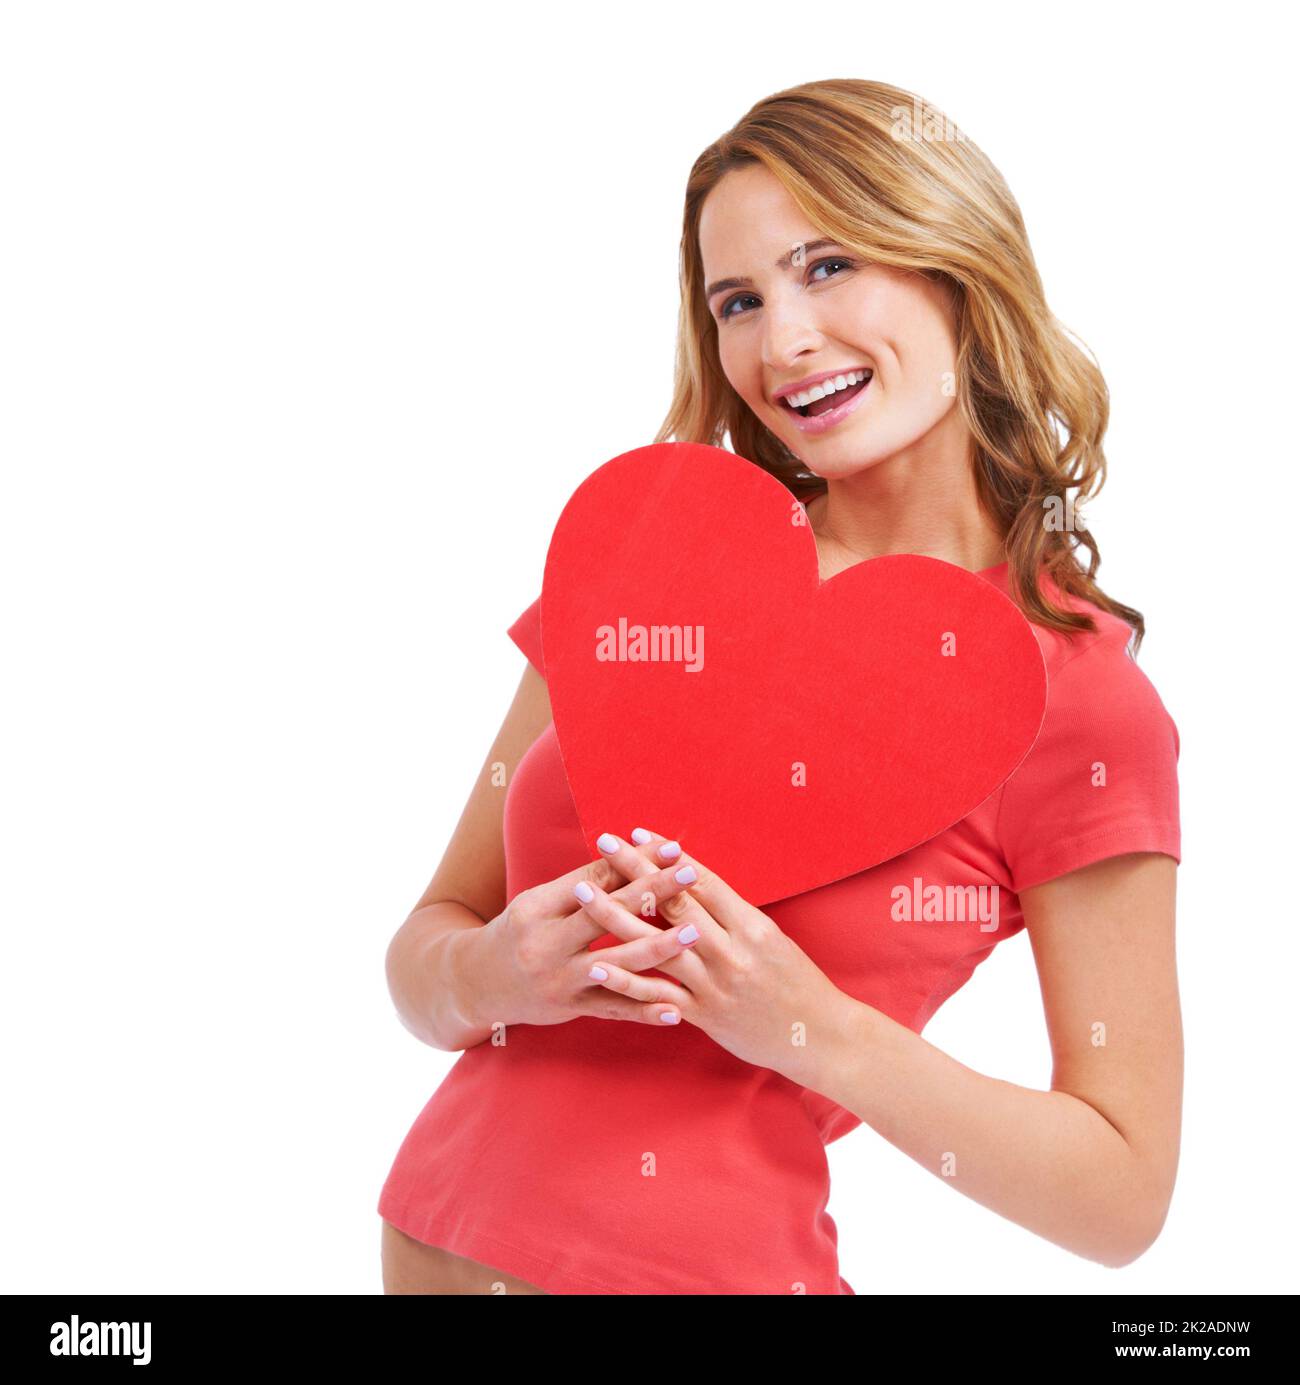 Romance is in the air. A excited young woman holding a heart-shaped placard while isolated on a white background. Stock Photo